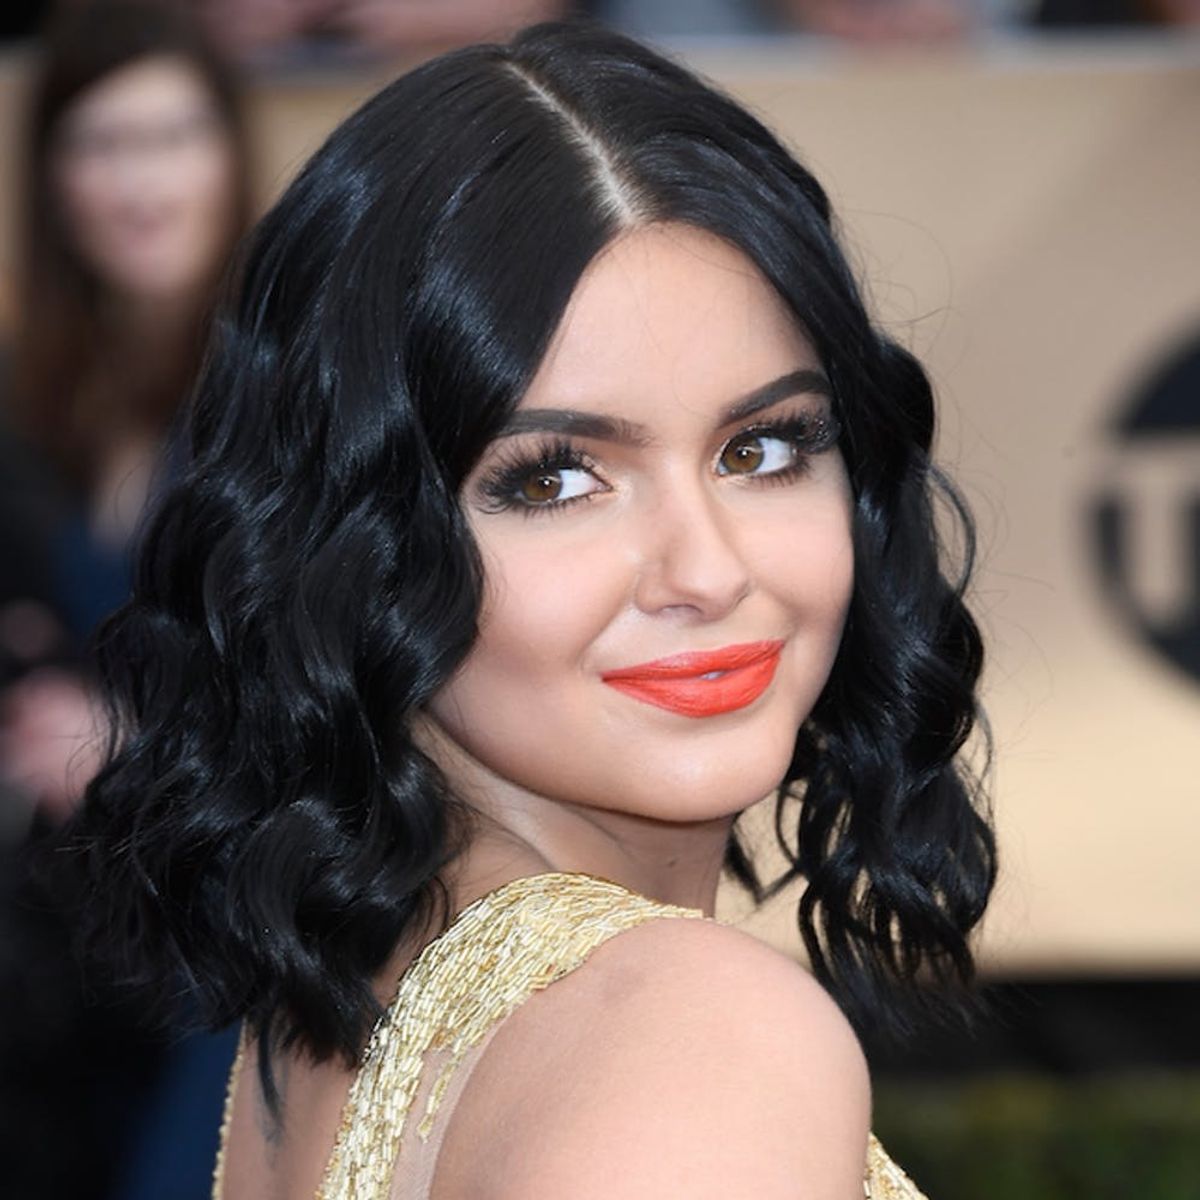 How to Be Confident in Your Swimwear, According to Ariel Winter